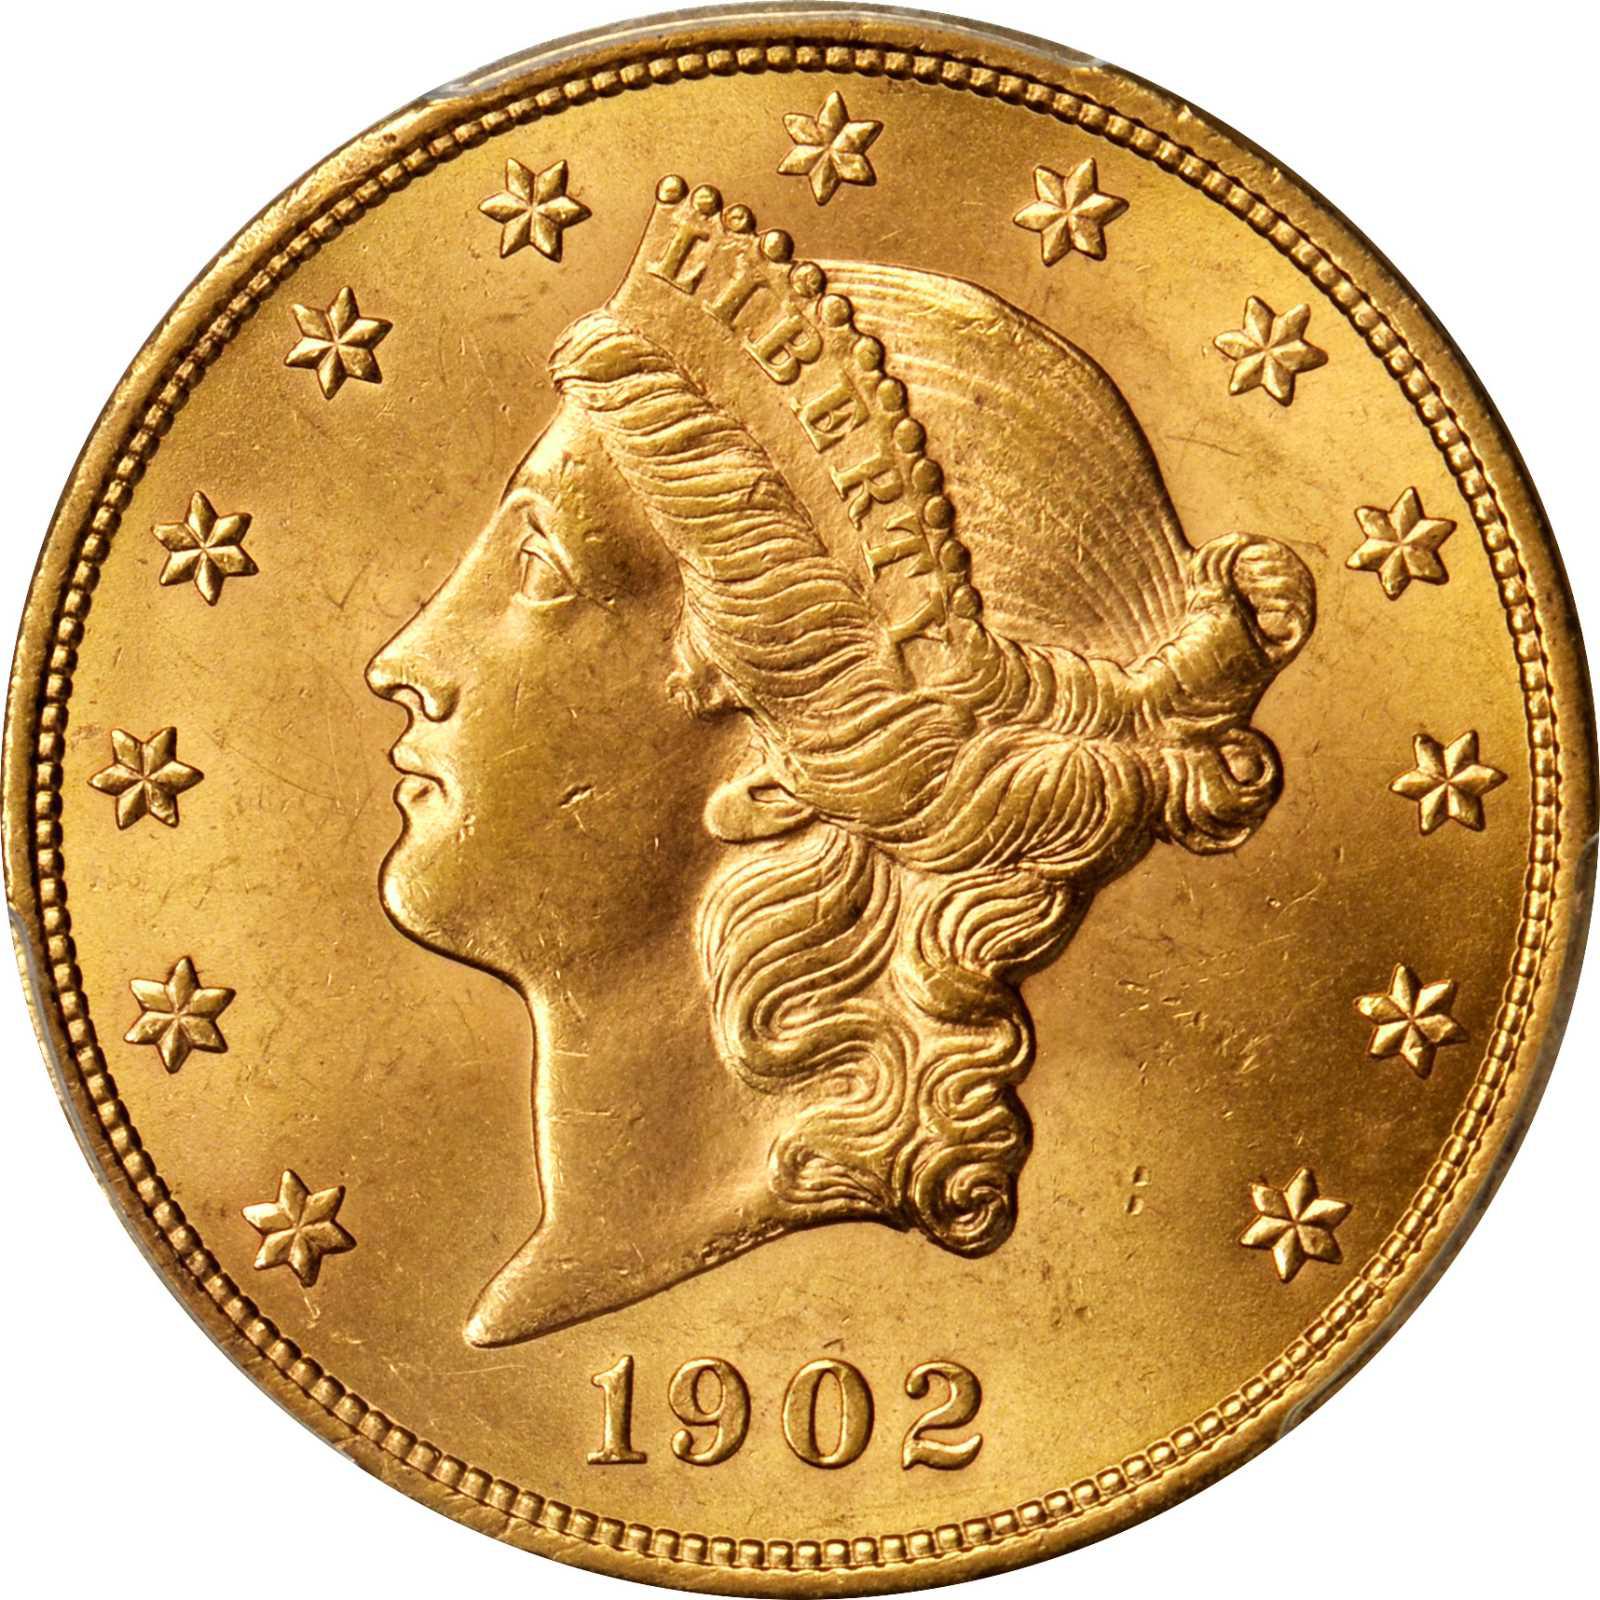 $20 gold coin worth